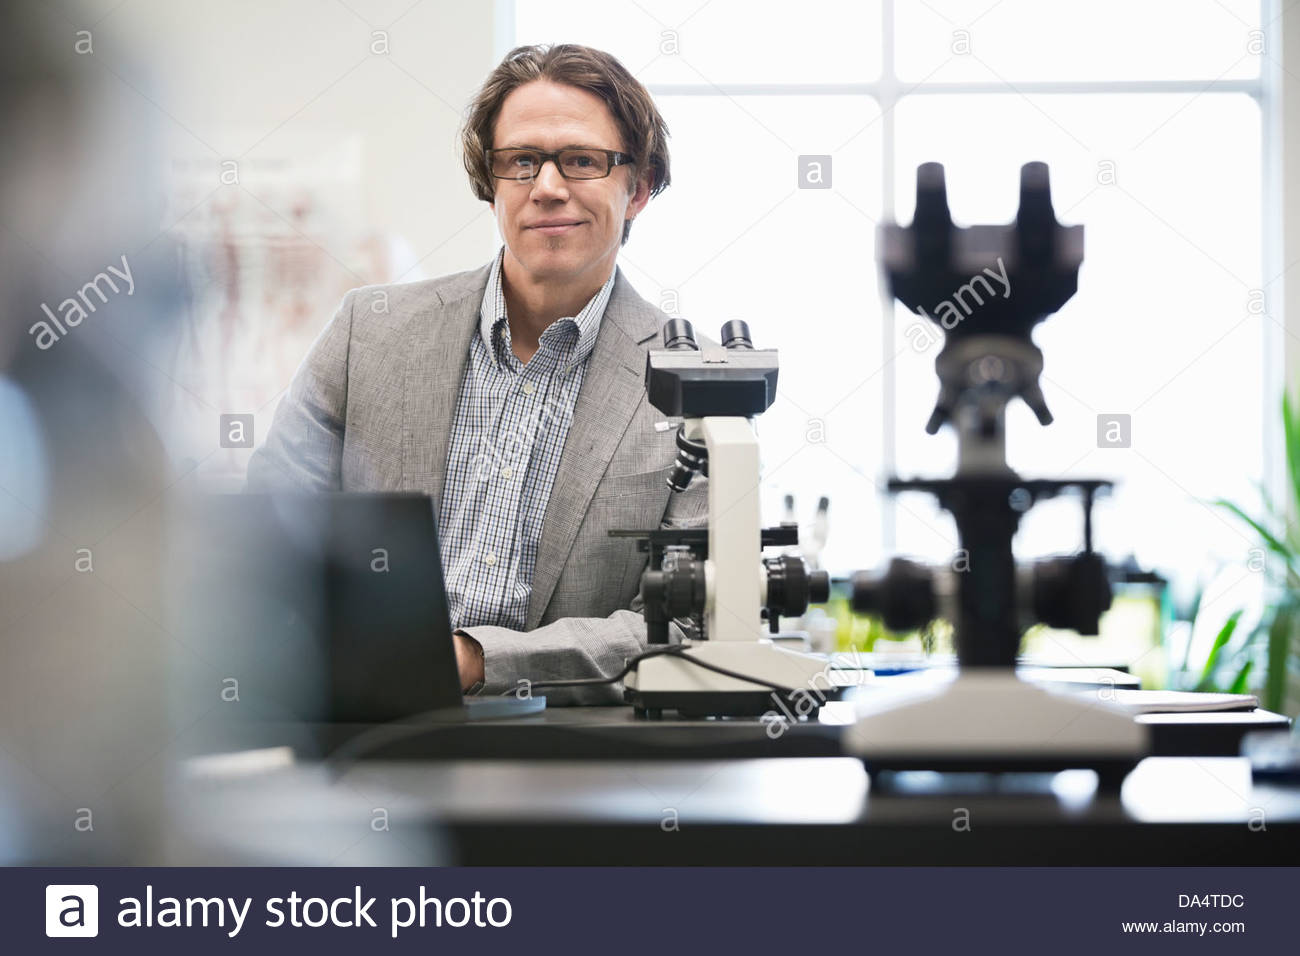 Portrait of male college professor leaning on table in science lab Stock Photo